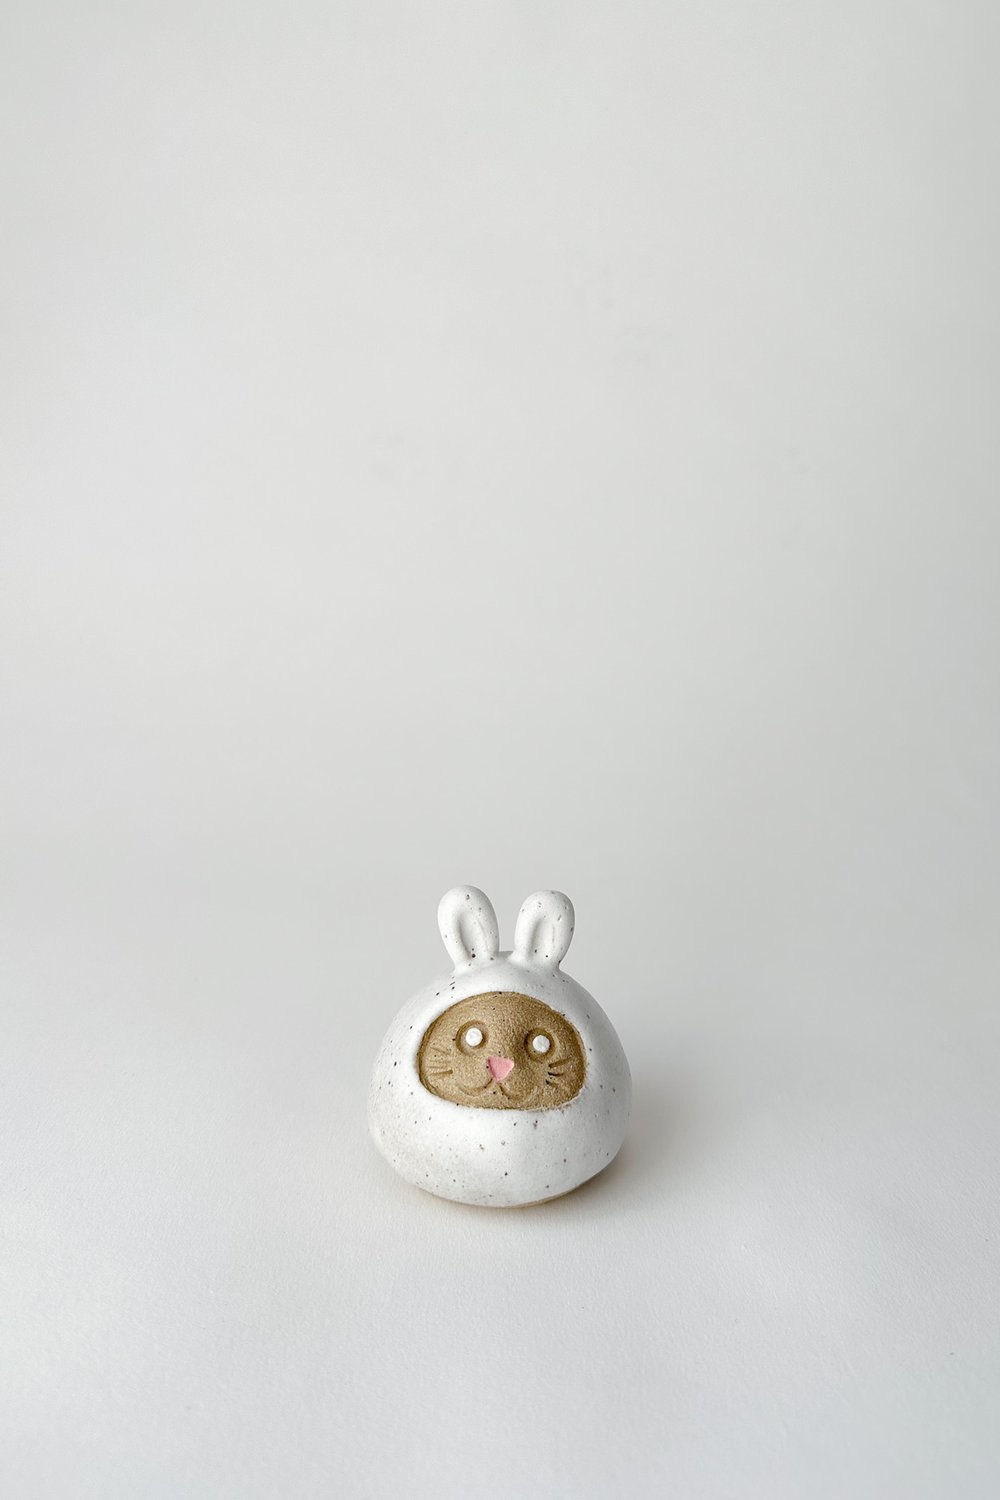 Image of Lunar New Year Bunny Daruma Wishing doll - Matte Speckled White